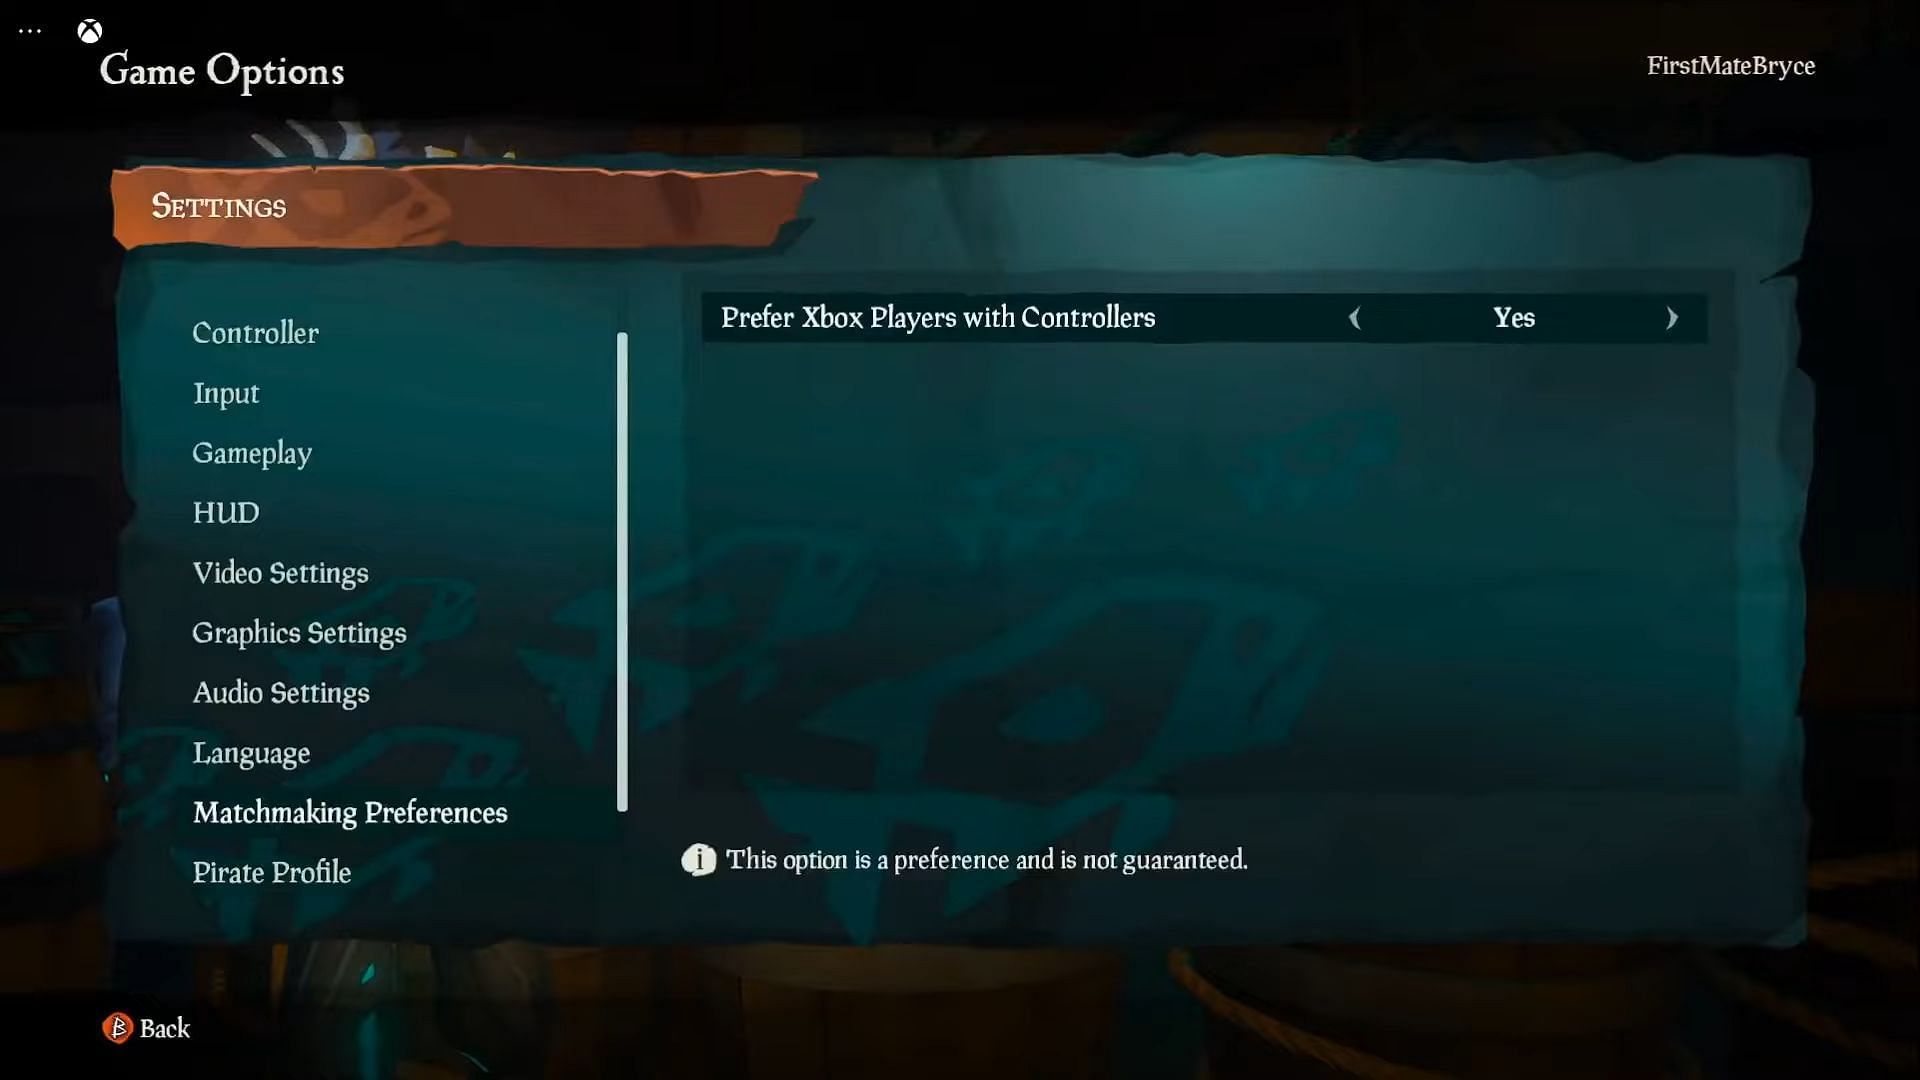 Disabling crossplay feature in Xbox consoles (Image via Rare || FirstMateBryce on YouTube)